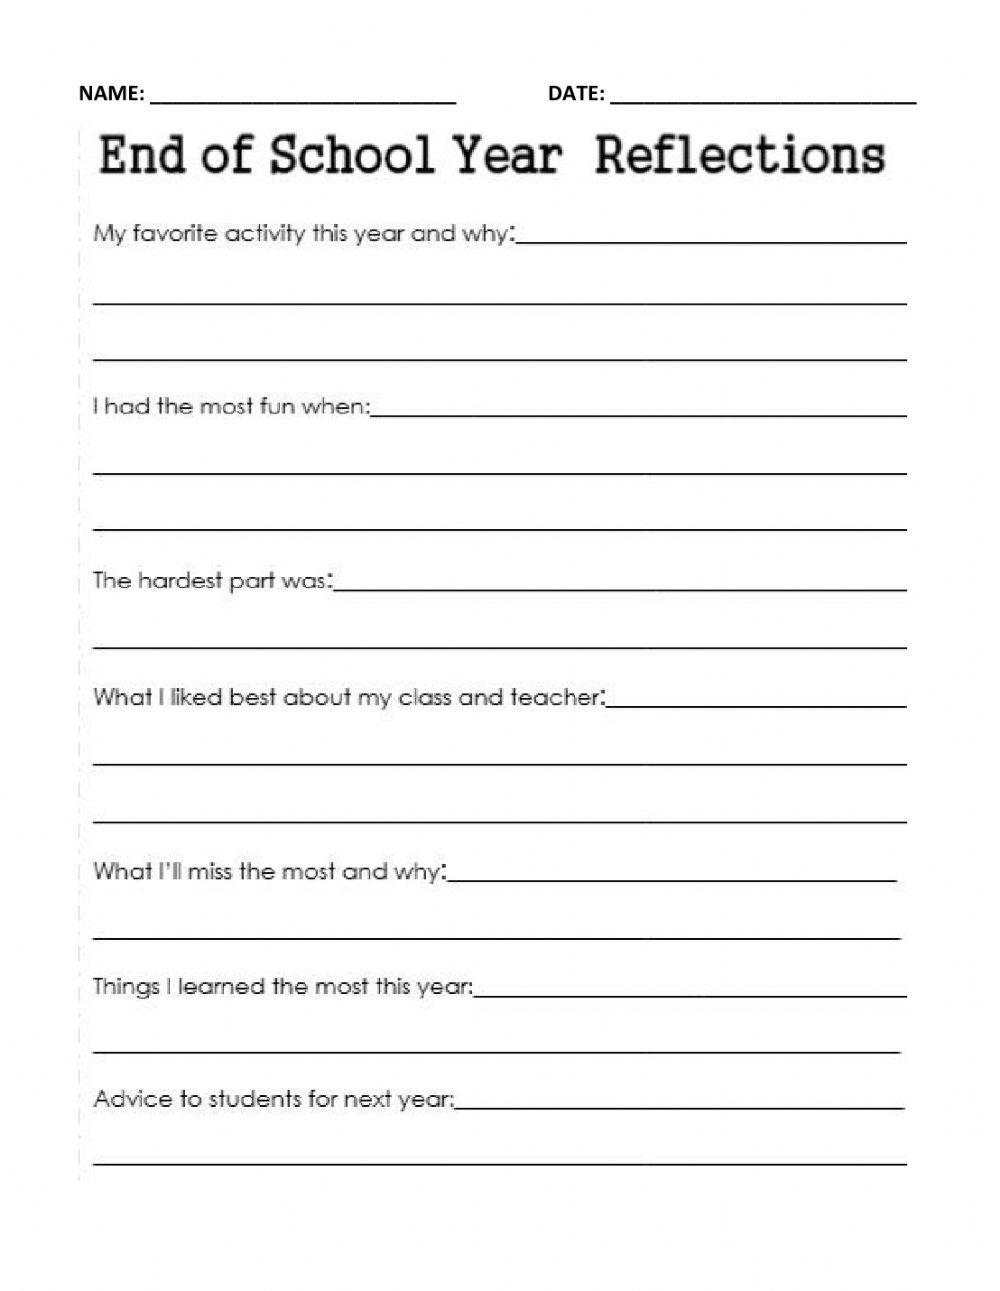 End of Year School Reflection